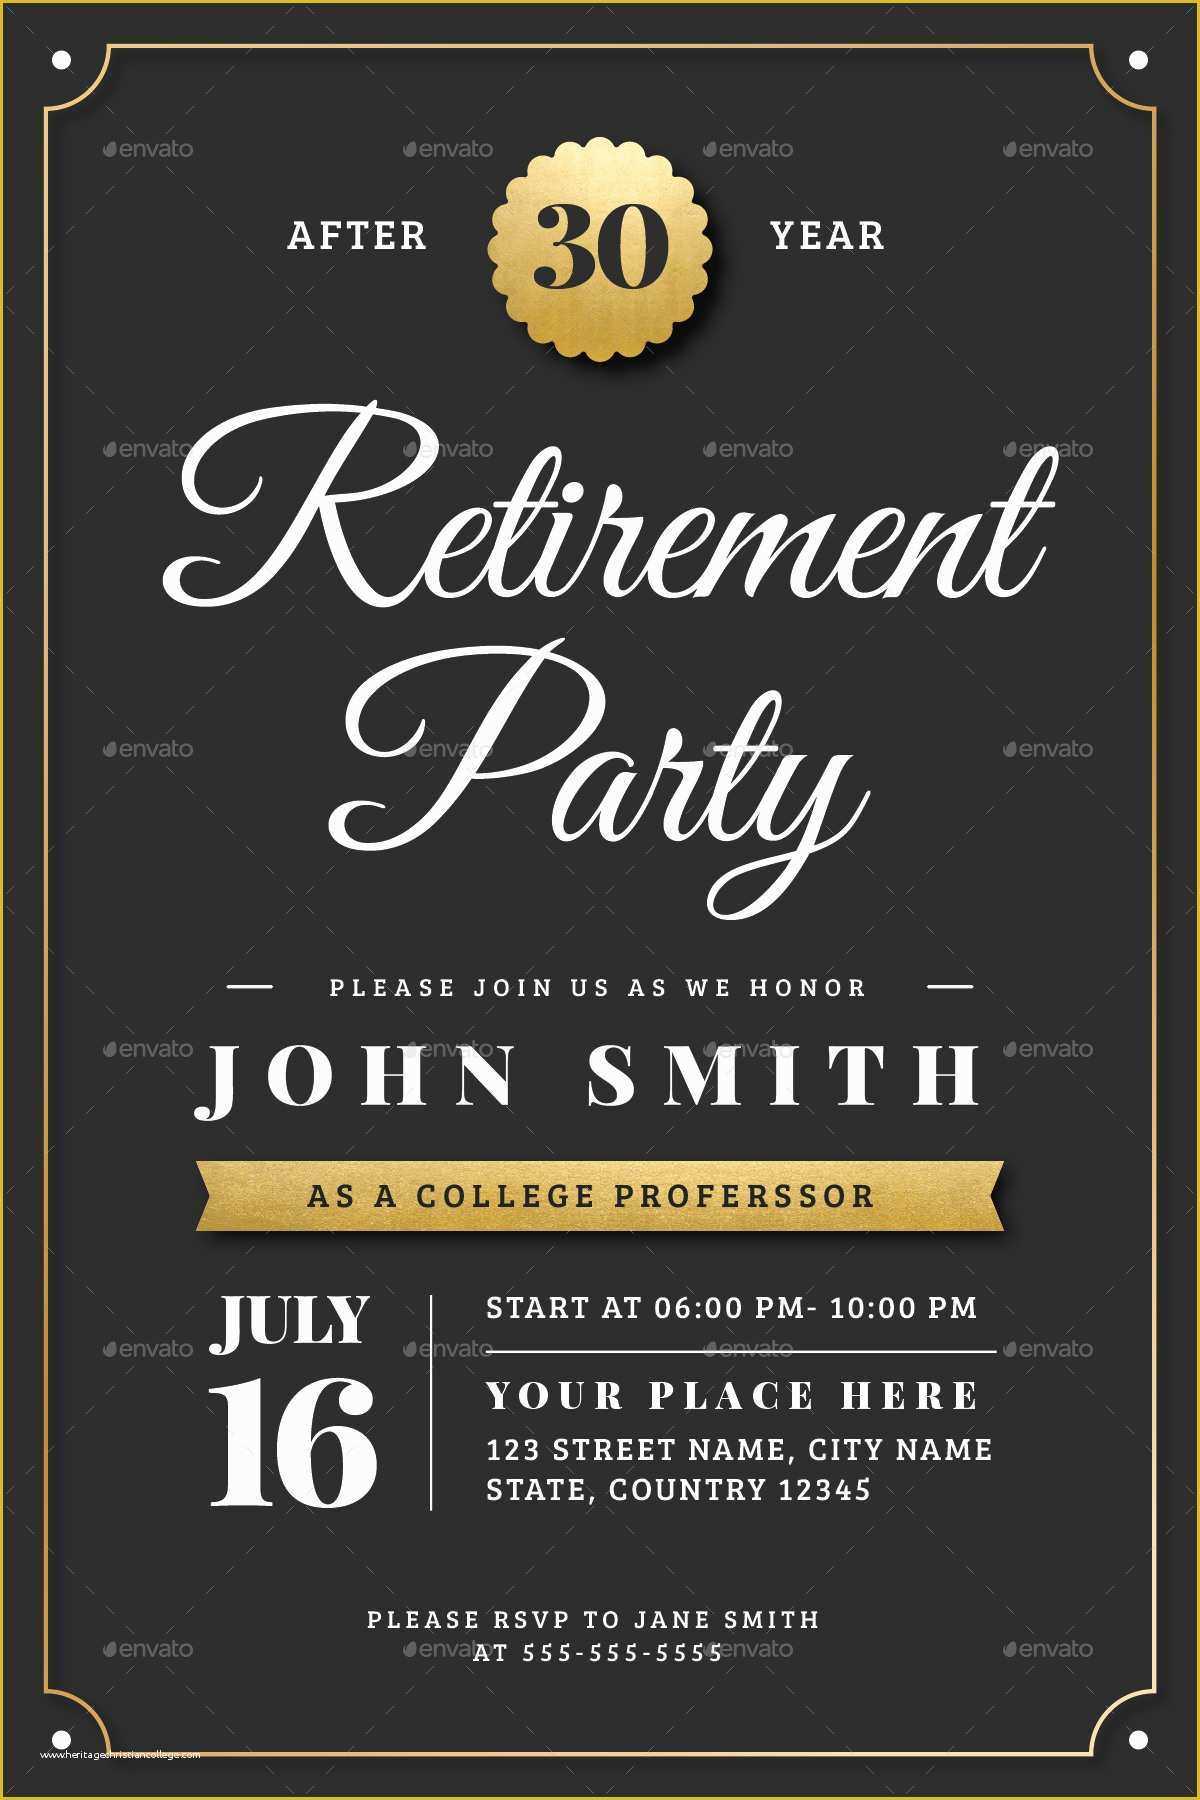 032 Retirement Party Announcement Template Free Of Gold Throughout Flyer Announcement Template